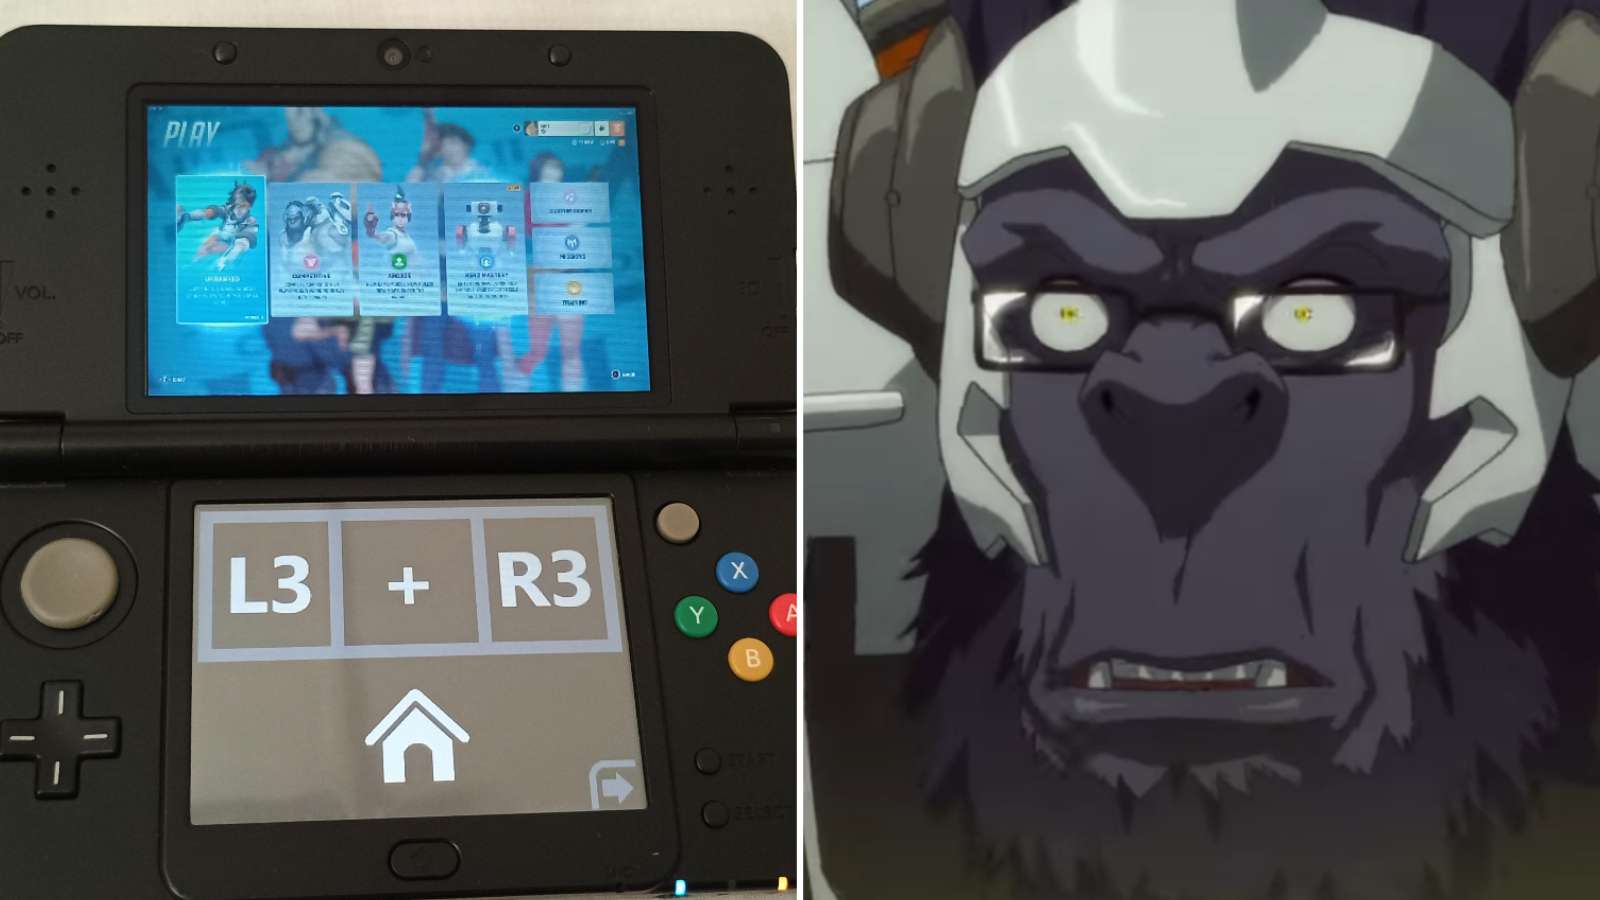 overwatch 2 running on nintendo 3ds with winston looking shocked